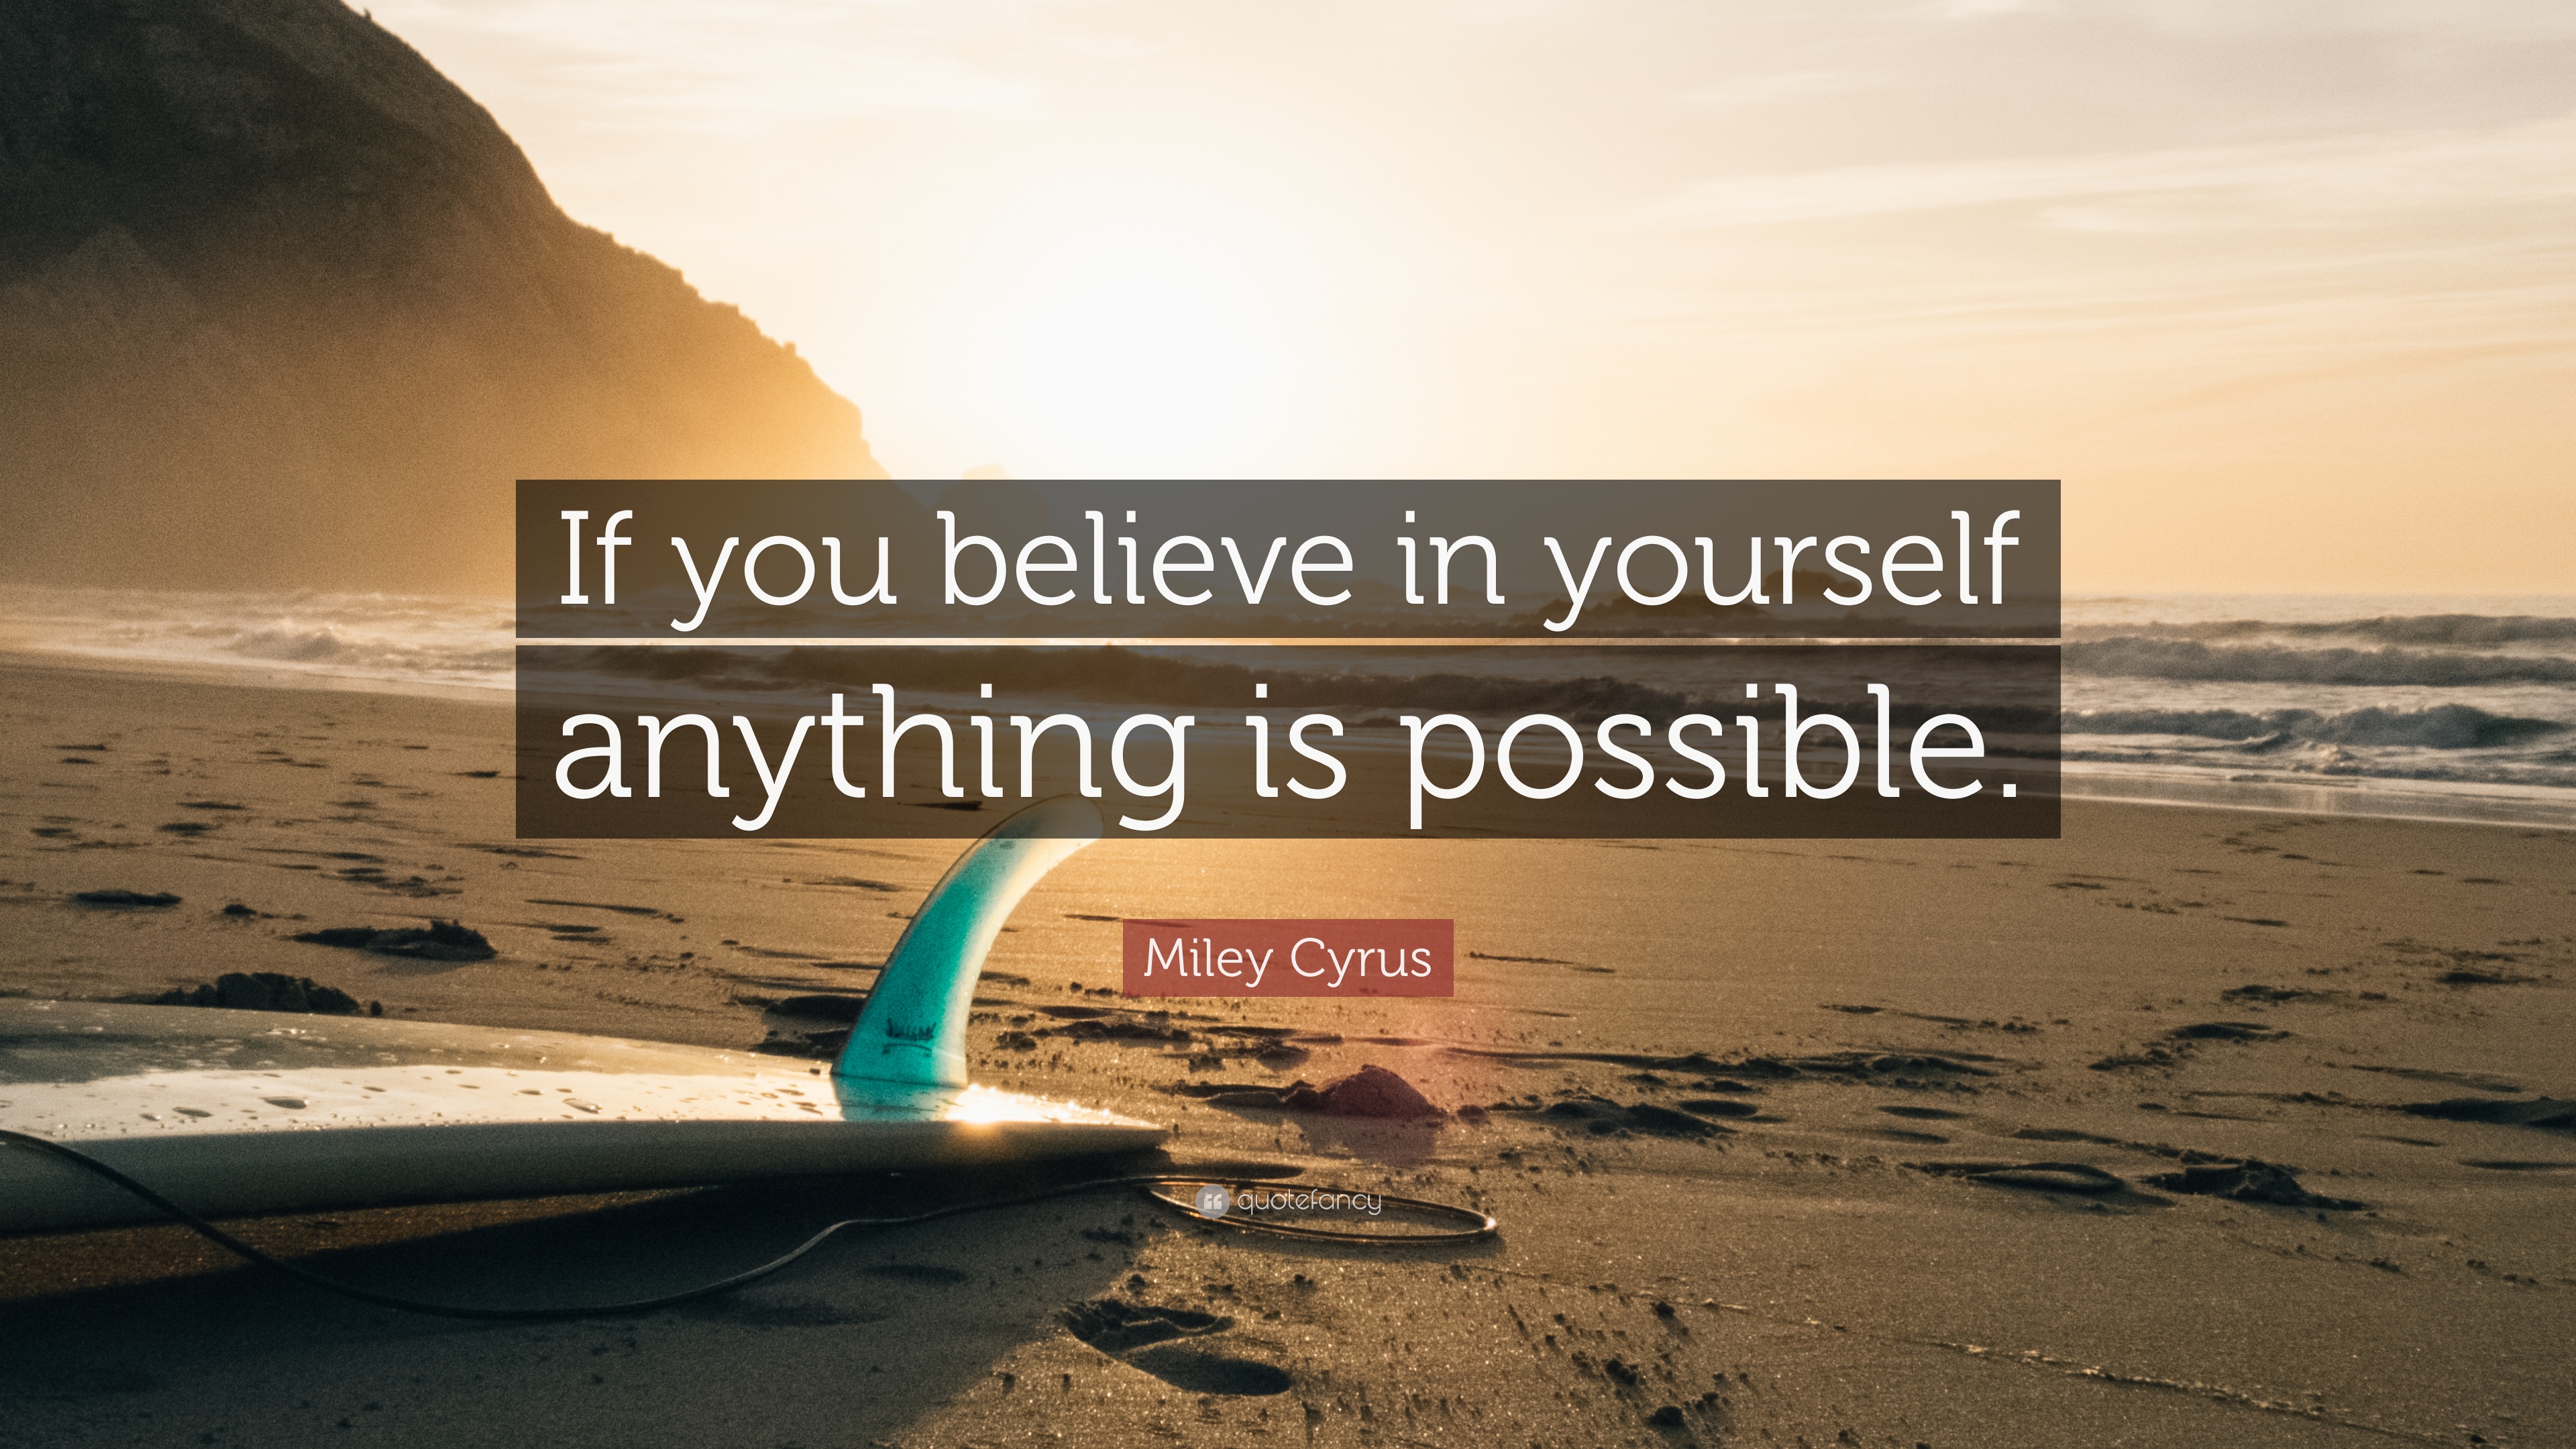 In Yourself Anything Is Possible - Keep Your Face To The Sun Quotes - HD Wallpaper 